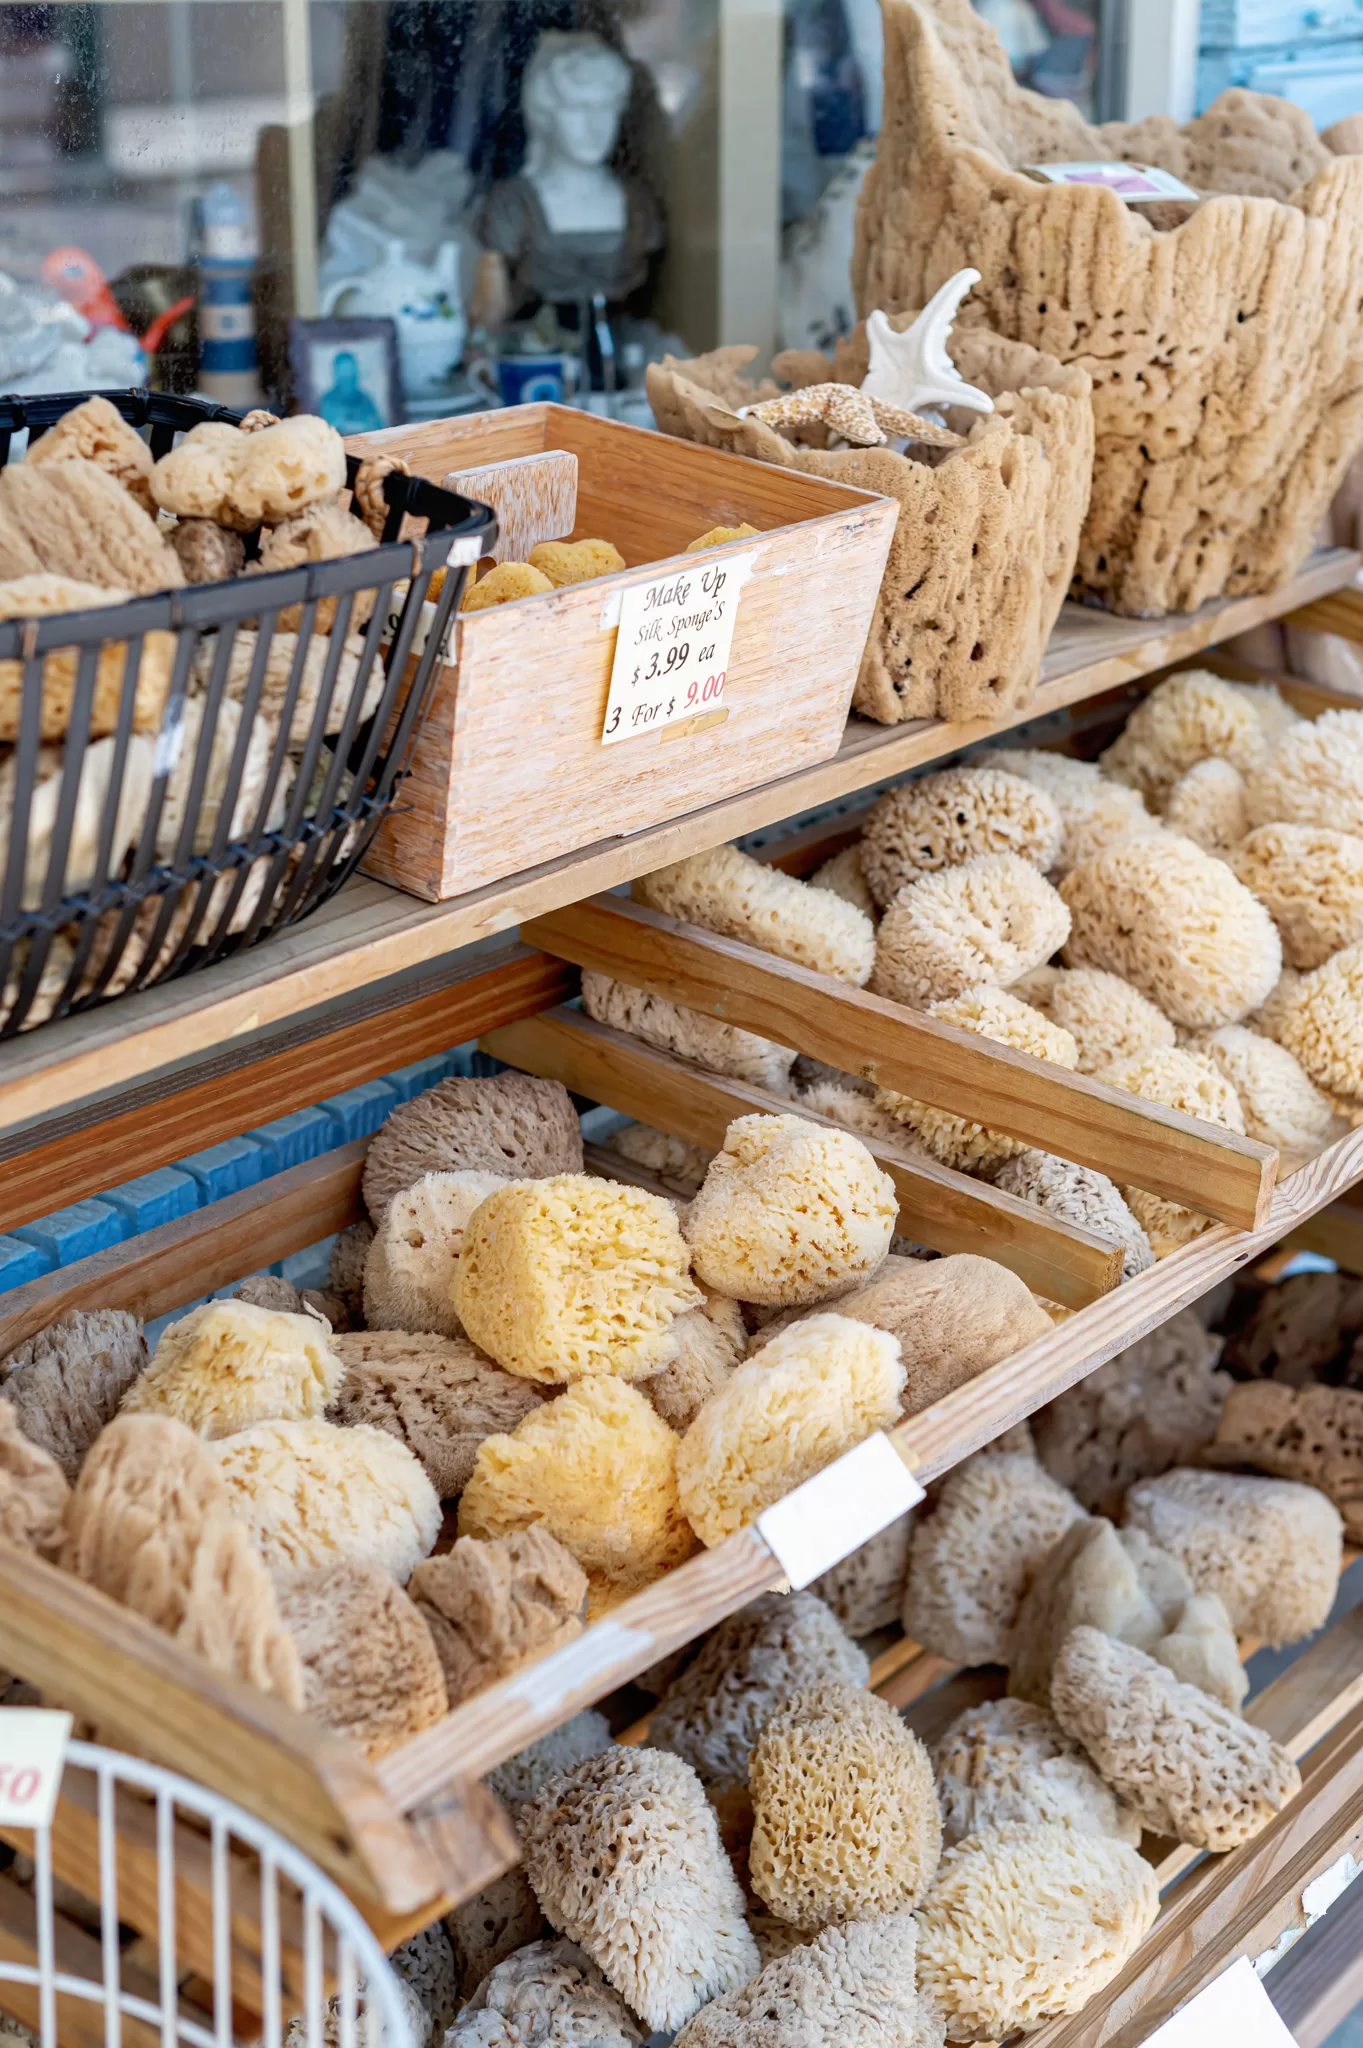 This image is for a blog post about Tarpon Springs Florida and shows sea Sponges for sale. 